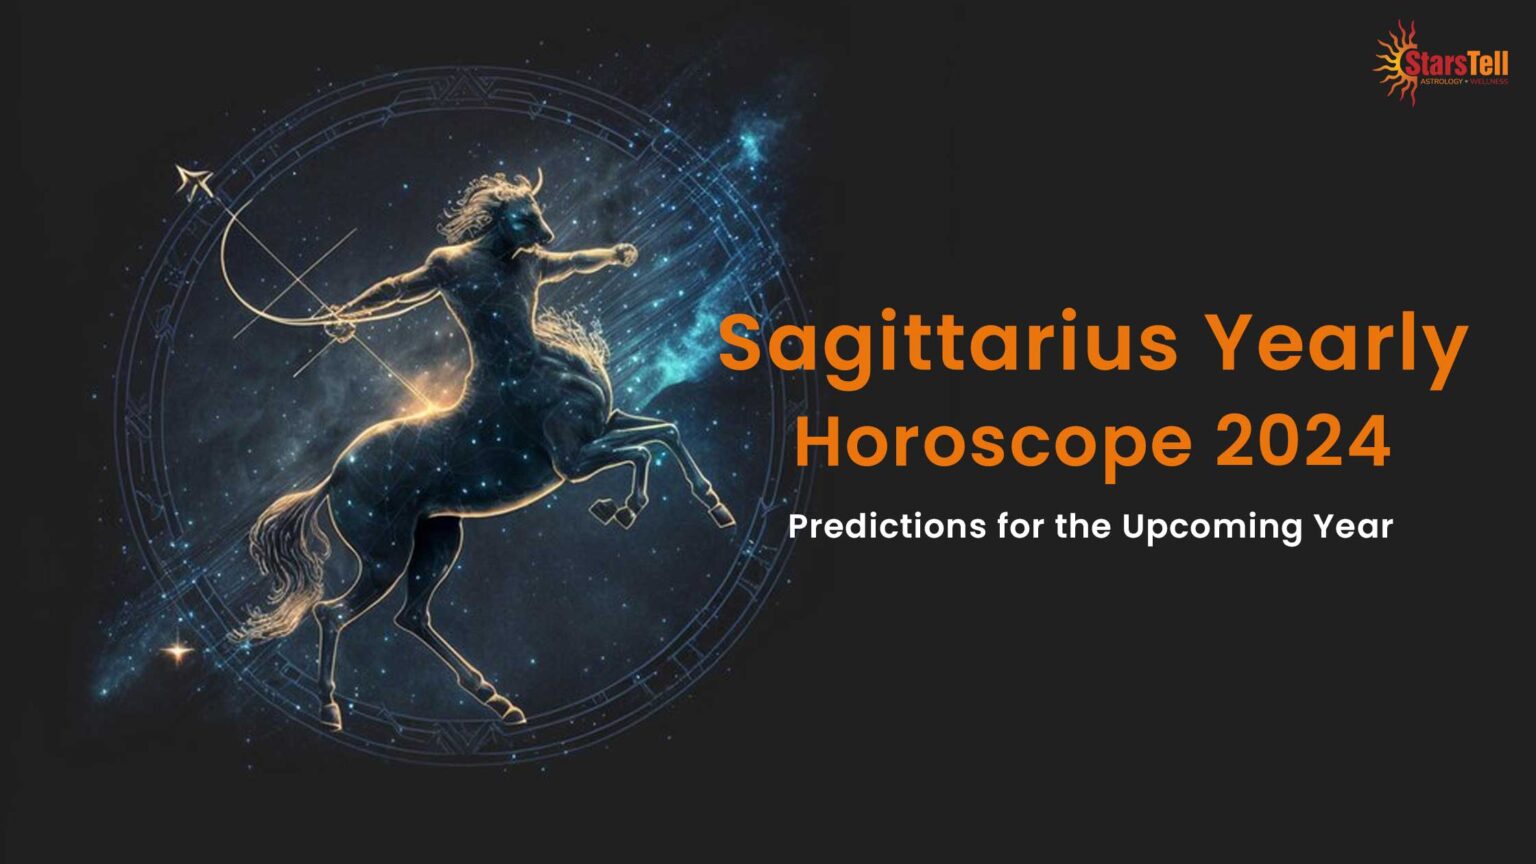 Sagittarius Yearly Horoscope 2024 Predictions for the Year